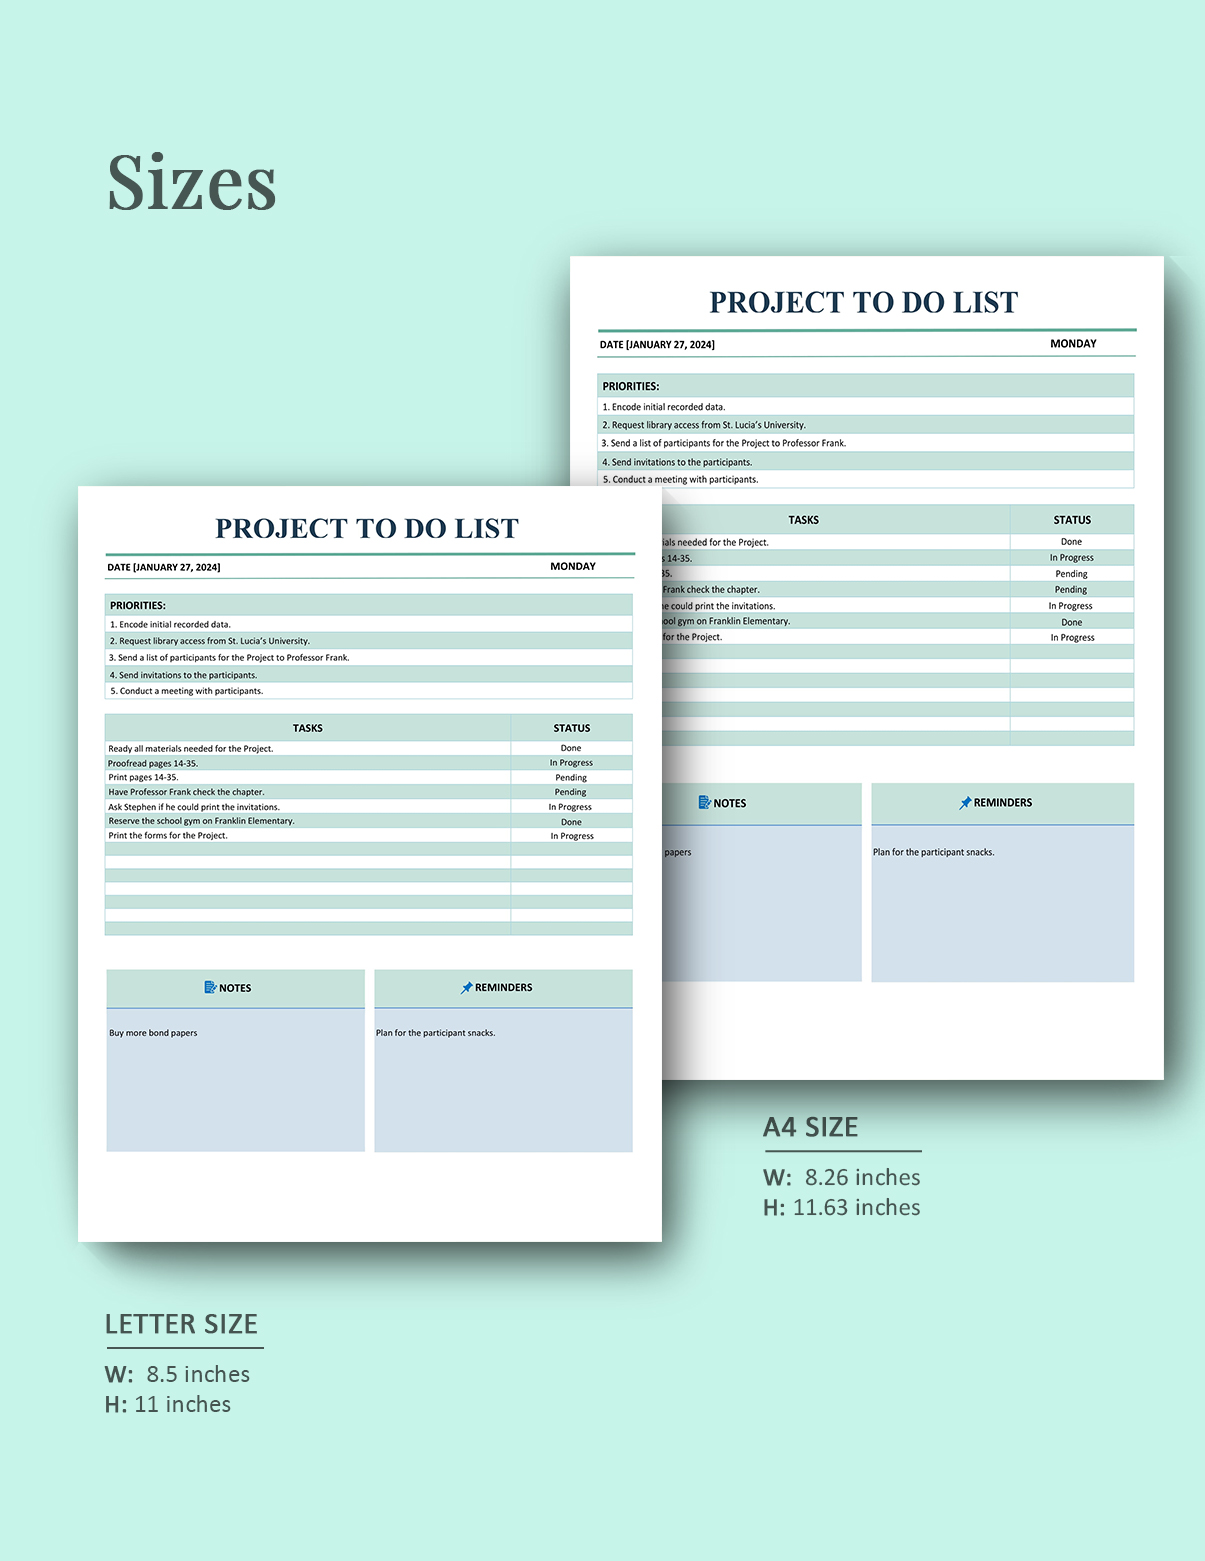 Project To-Do List Template